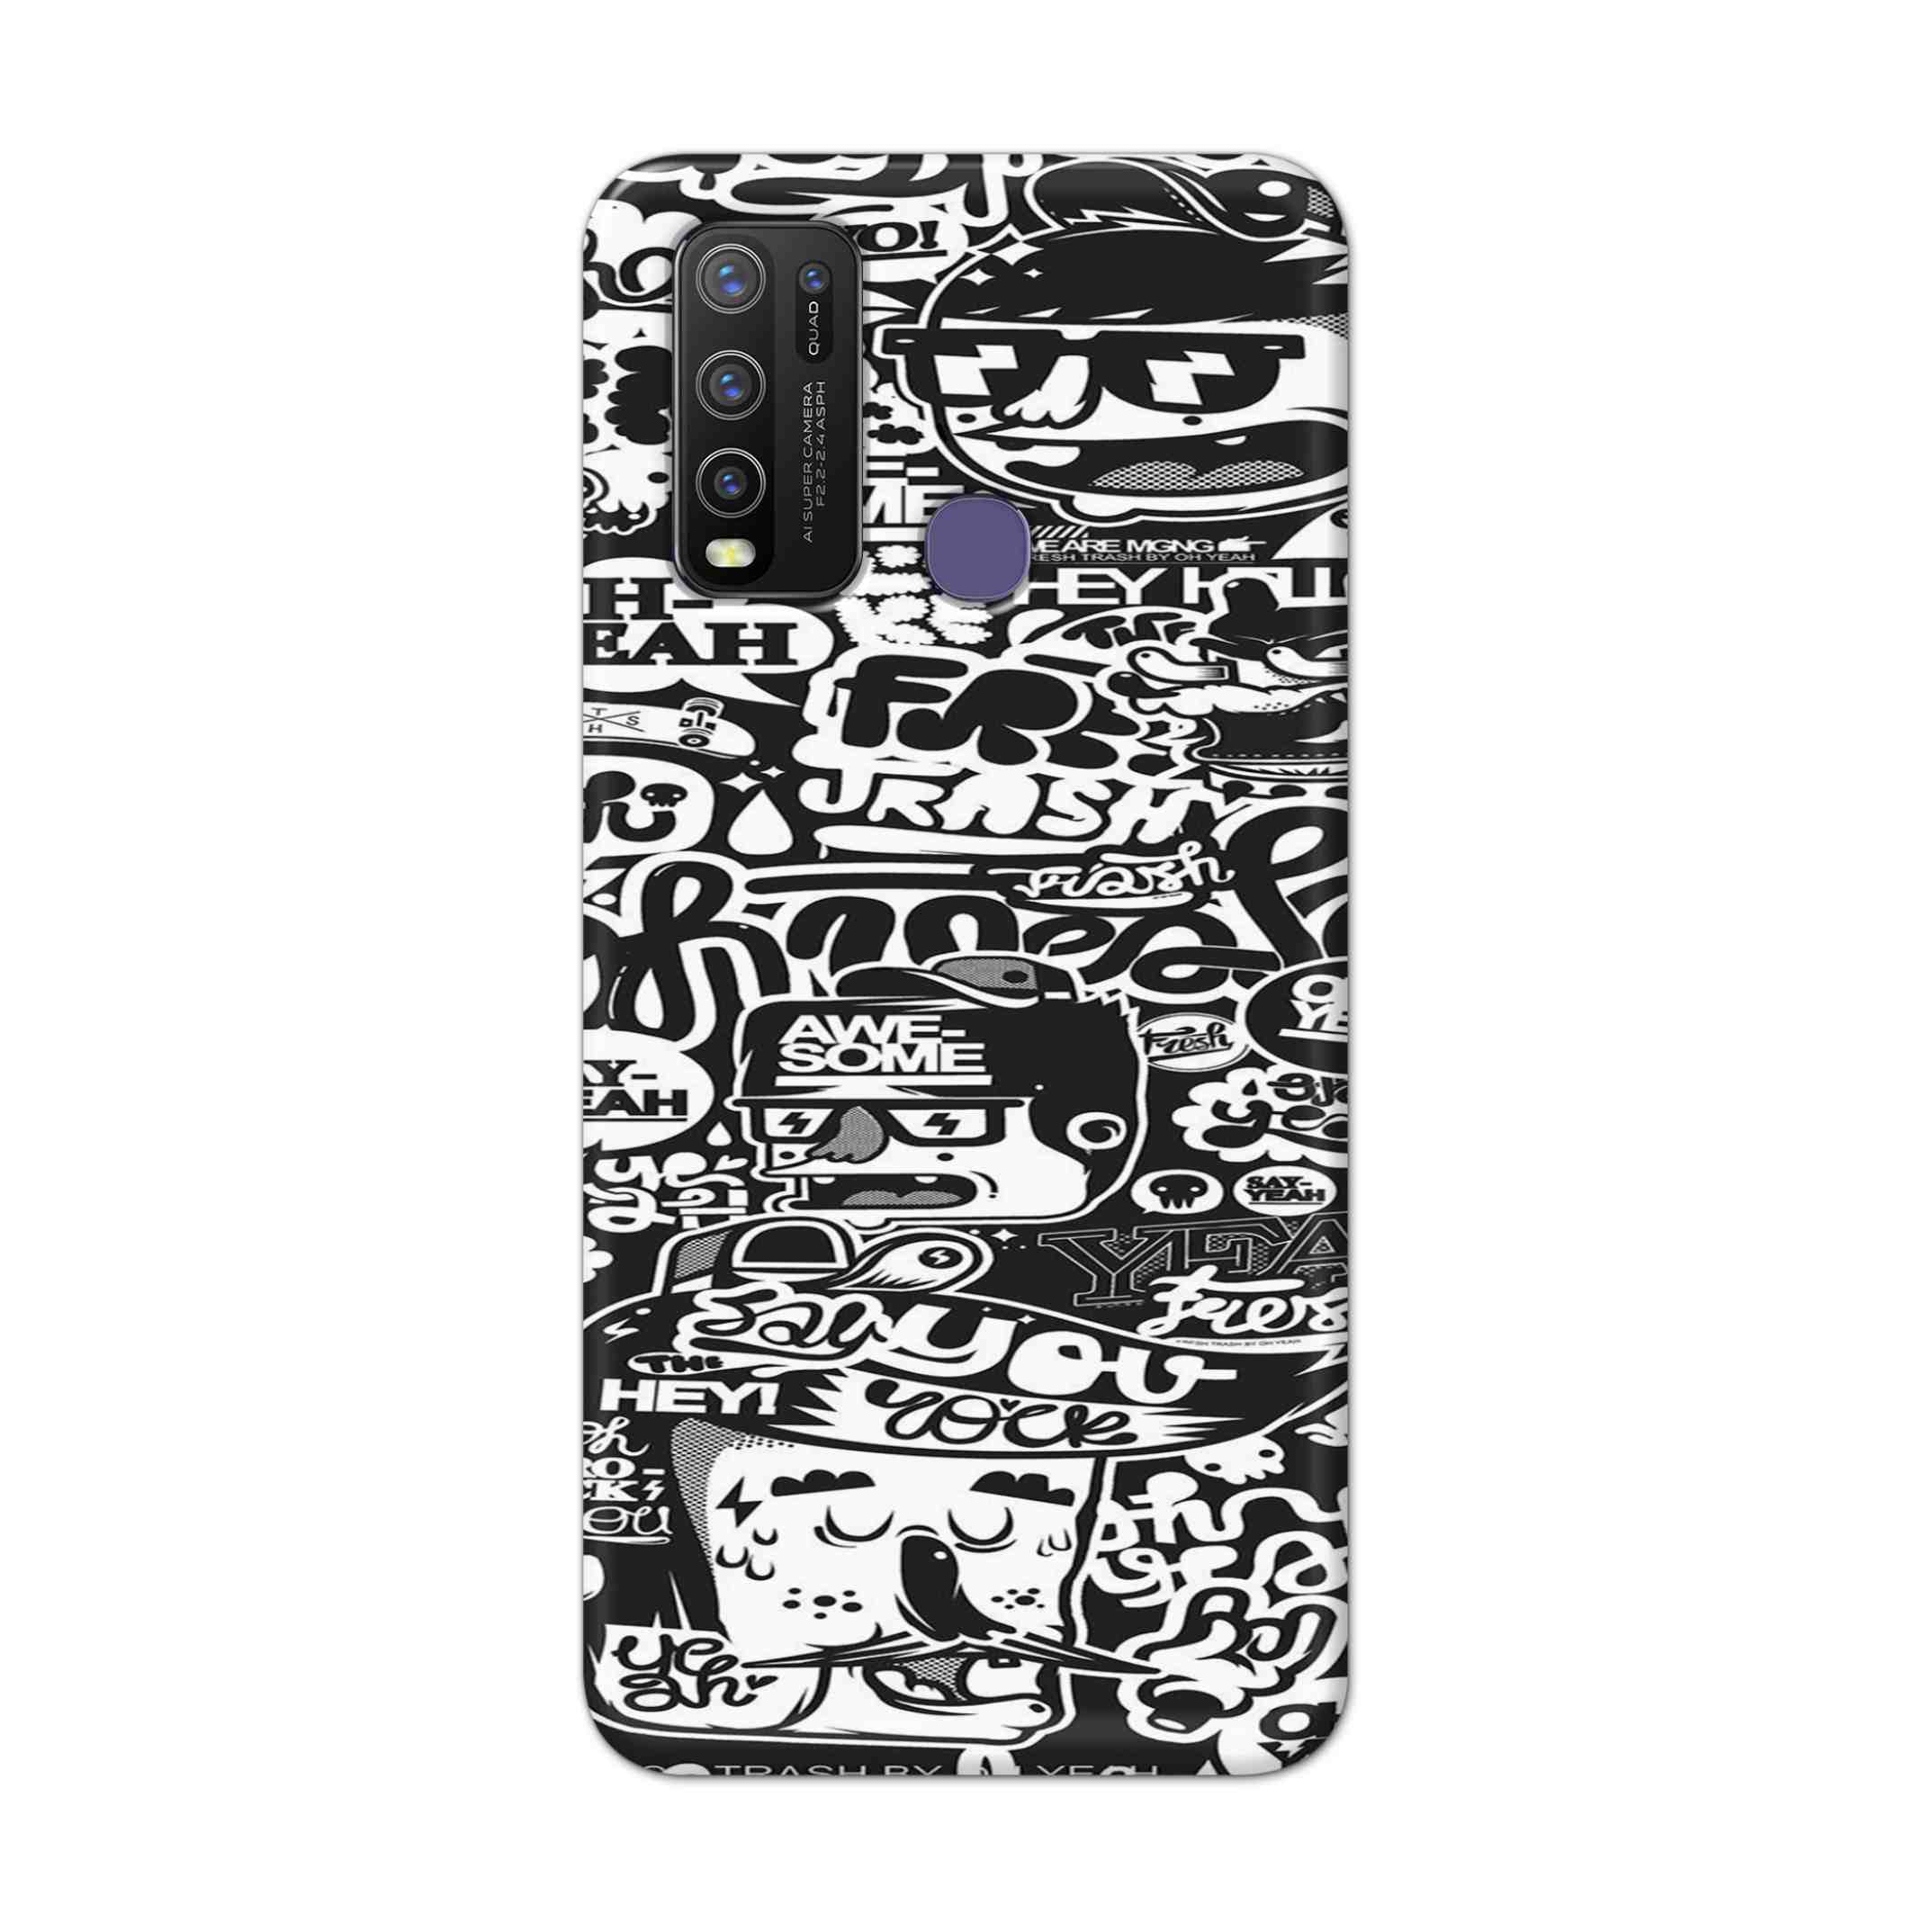 Buy Awesome Hard Back Mobile Phone Case Cover For Vivo Y50 Online